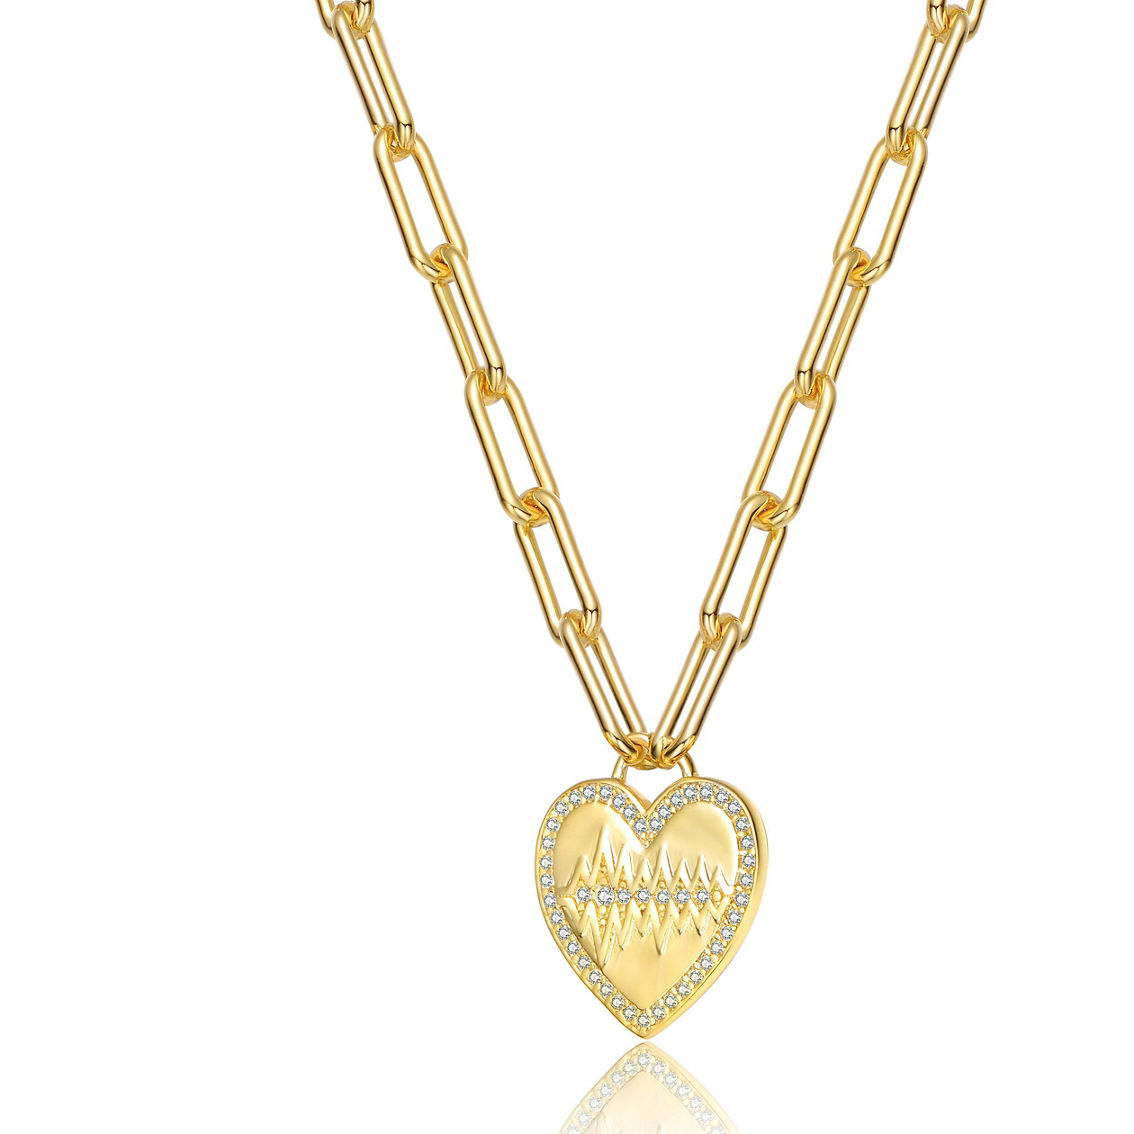 14K Gold Plated Cubic Zirconia Charm Necklace - Image 2 of 3